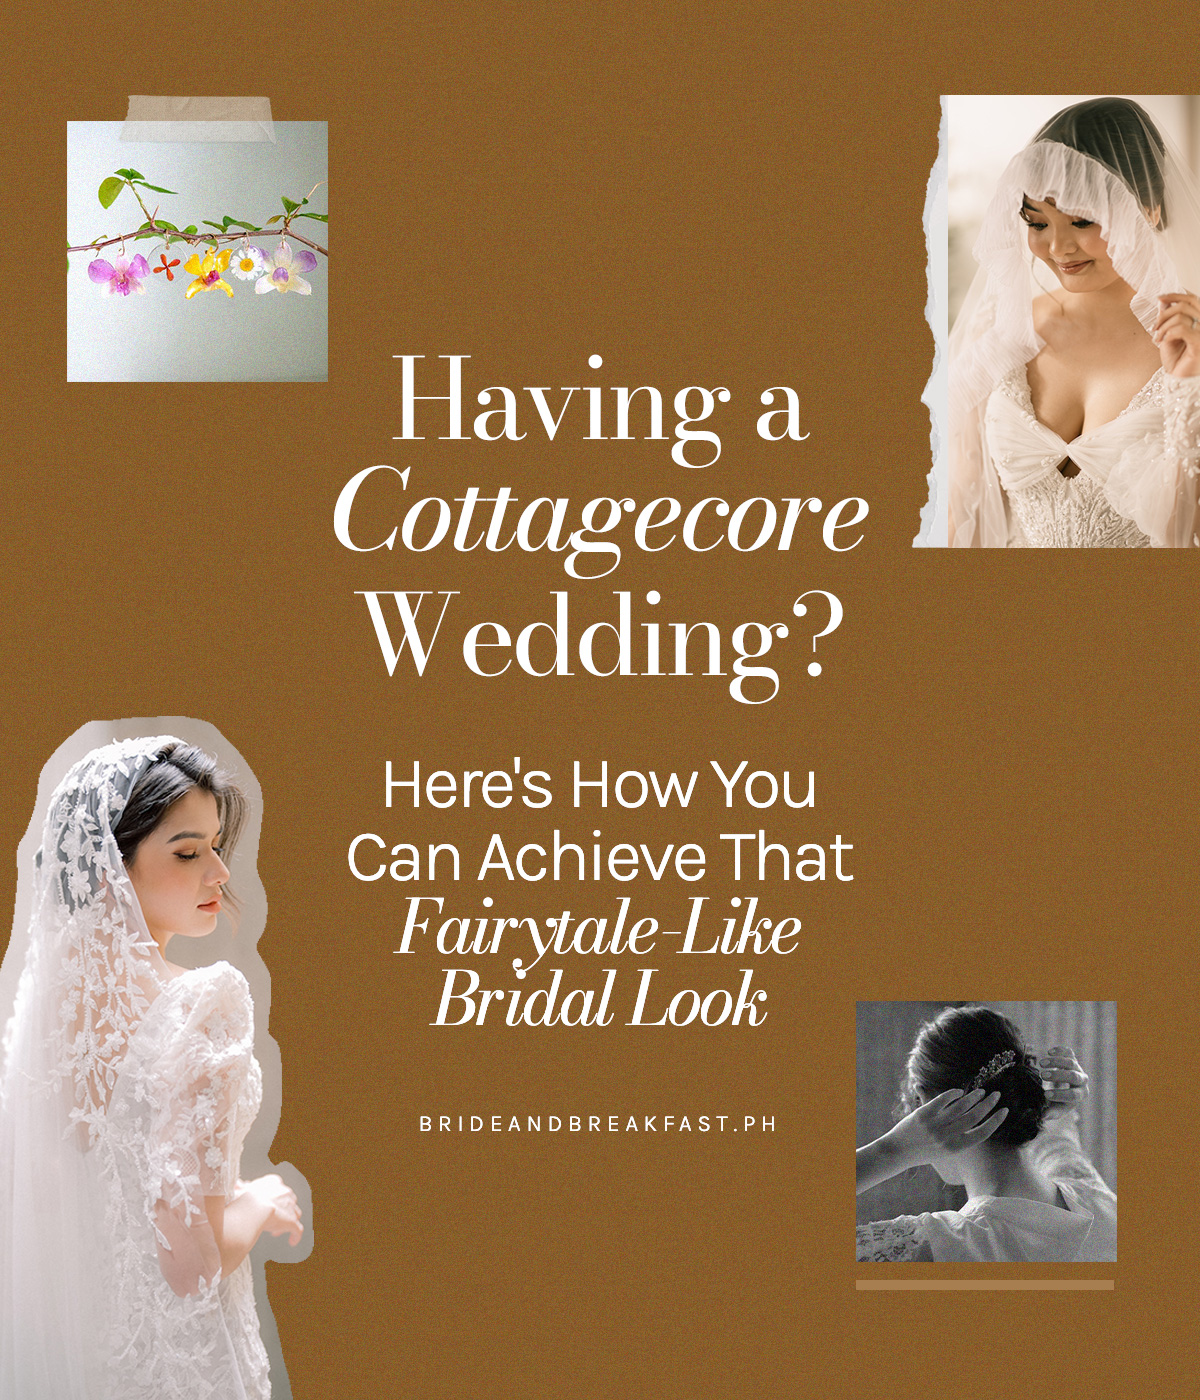 Having a Cottagecore Wedding? Here's How You Can Achieve That Fairytale-Like Bridal Look